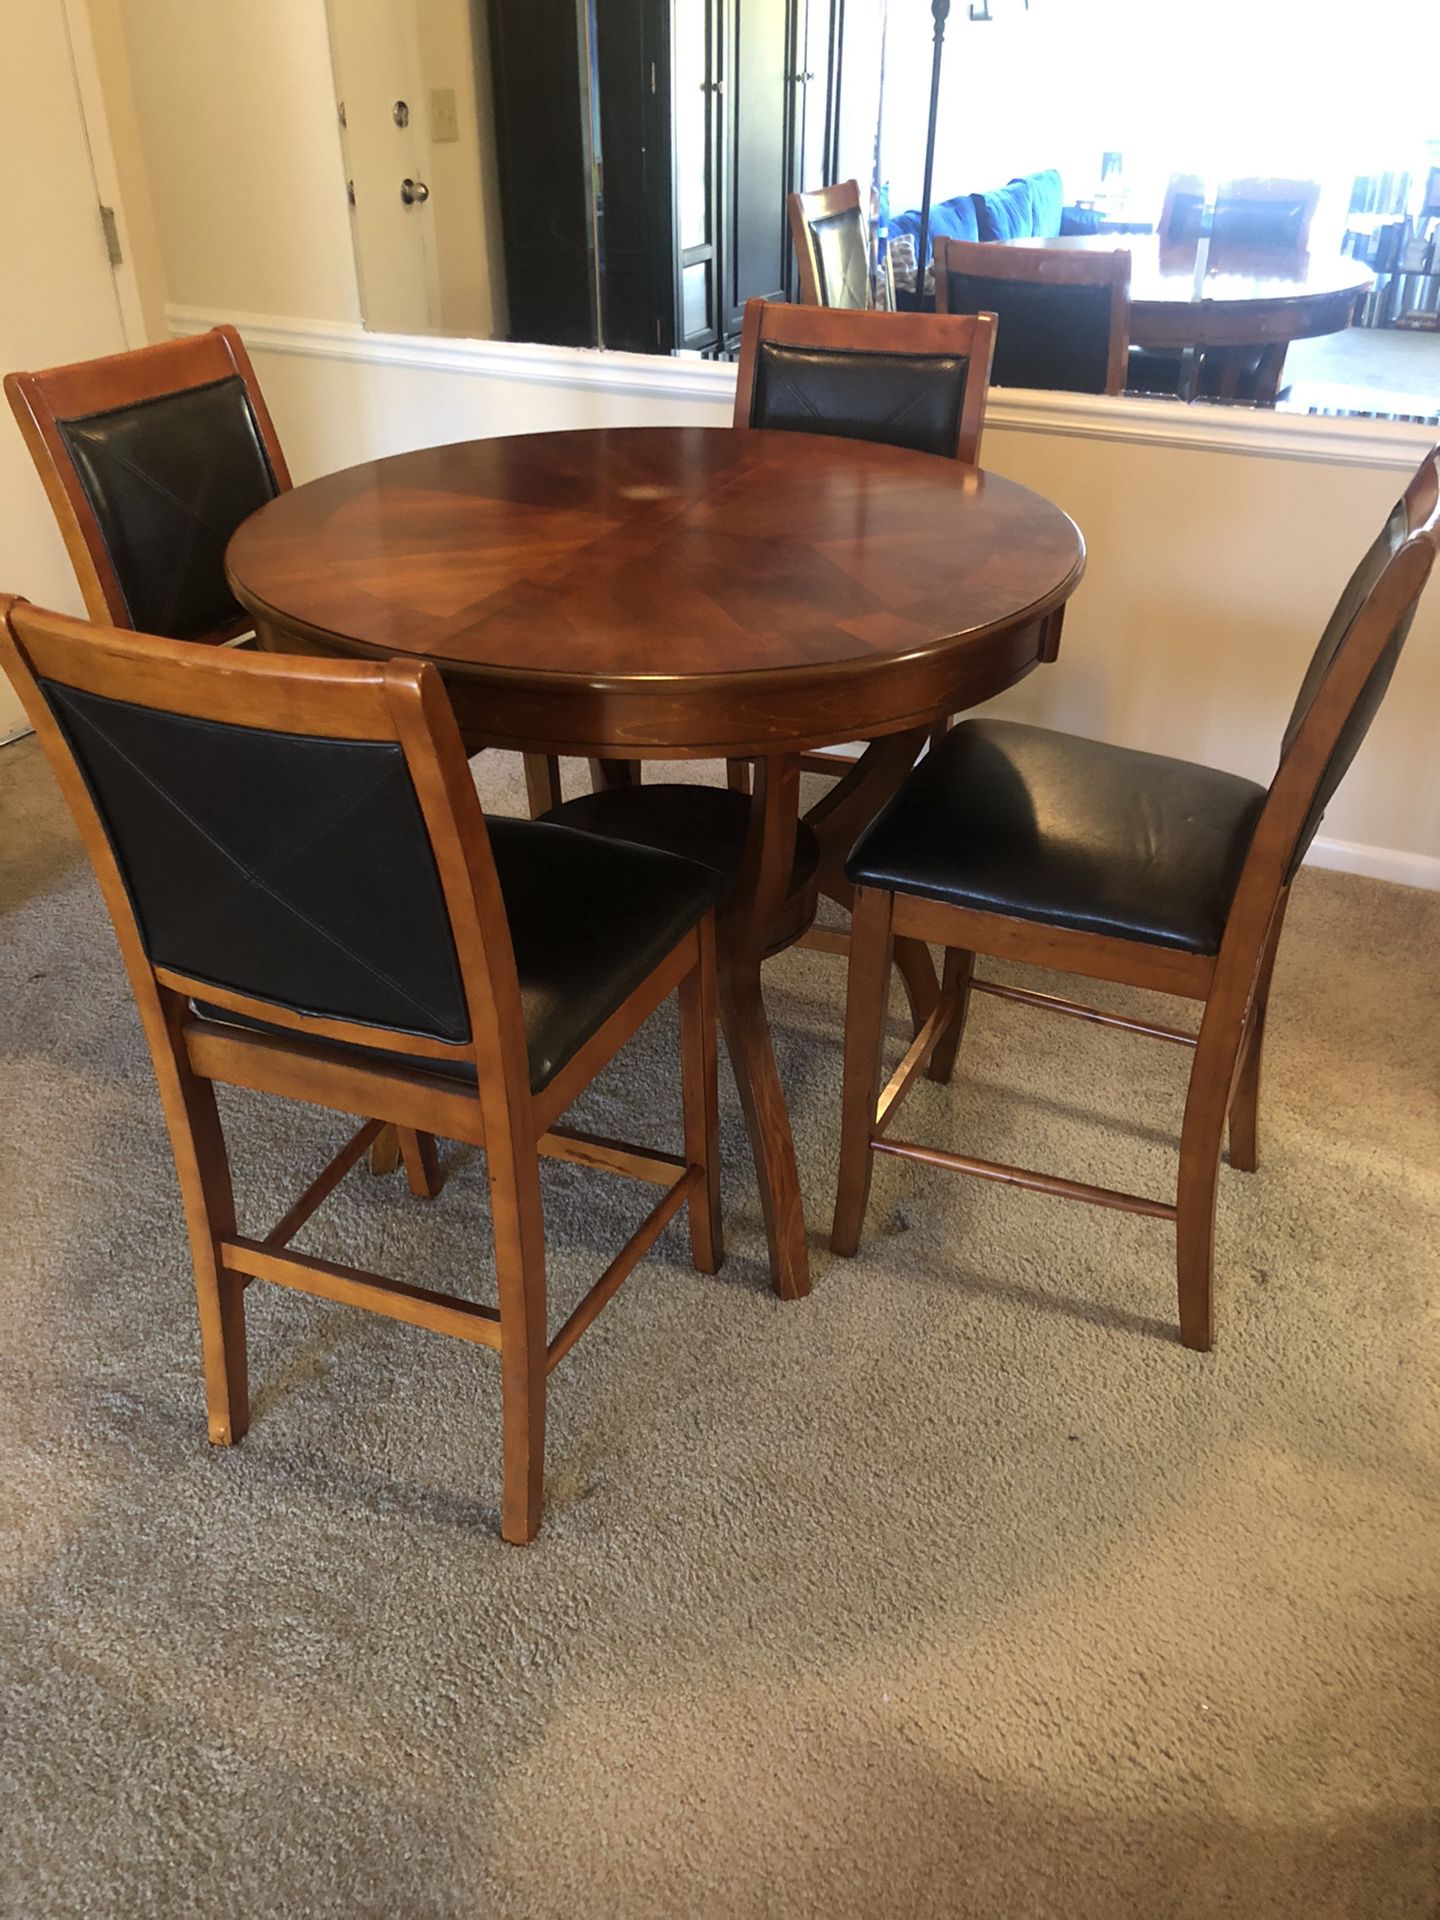 Free Bar Height dining table with 4 chairs with leather padding